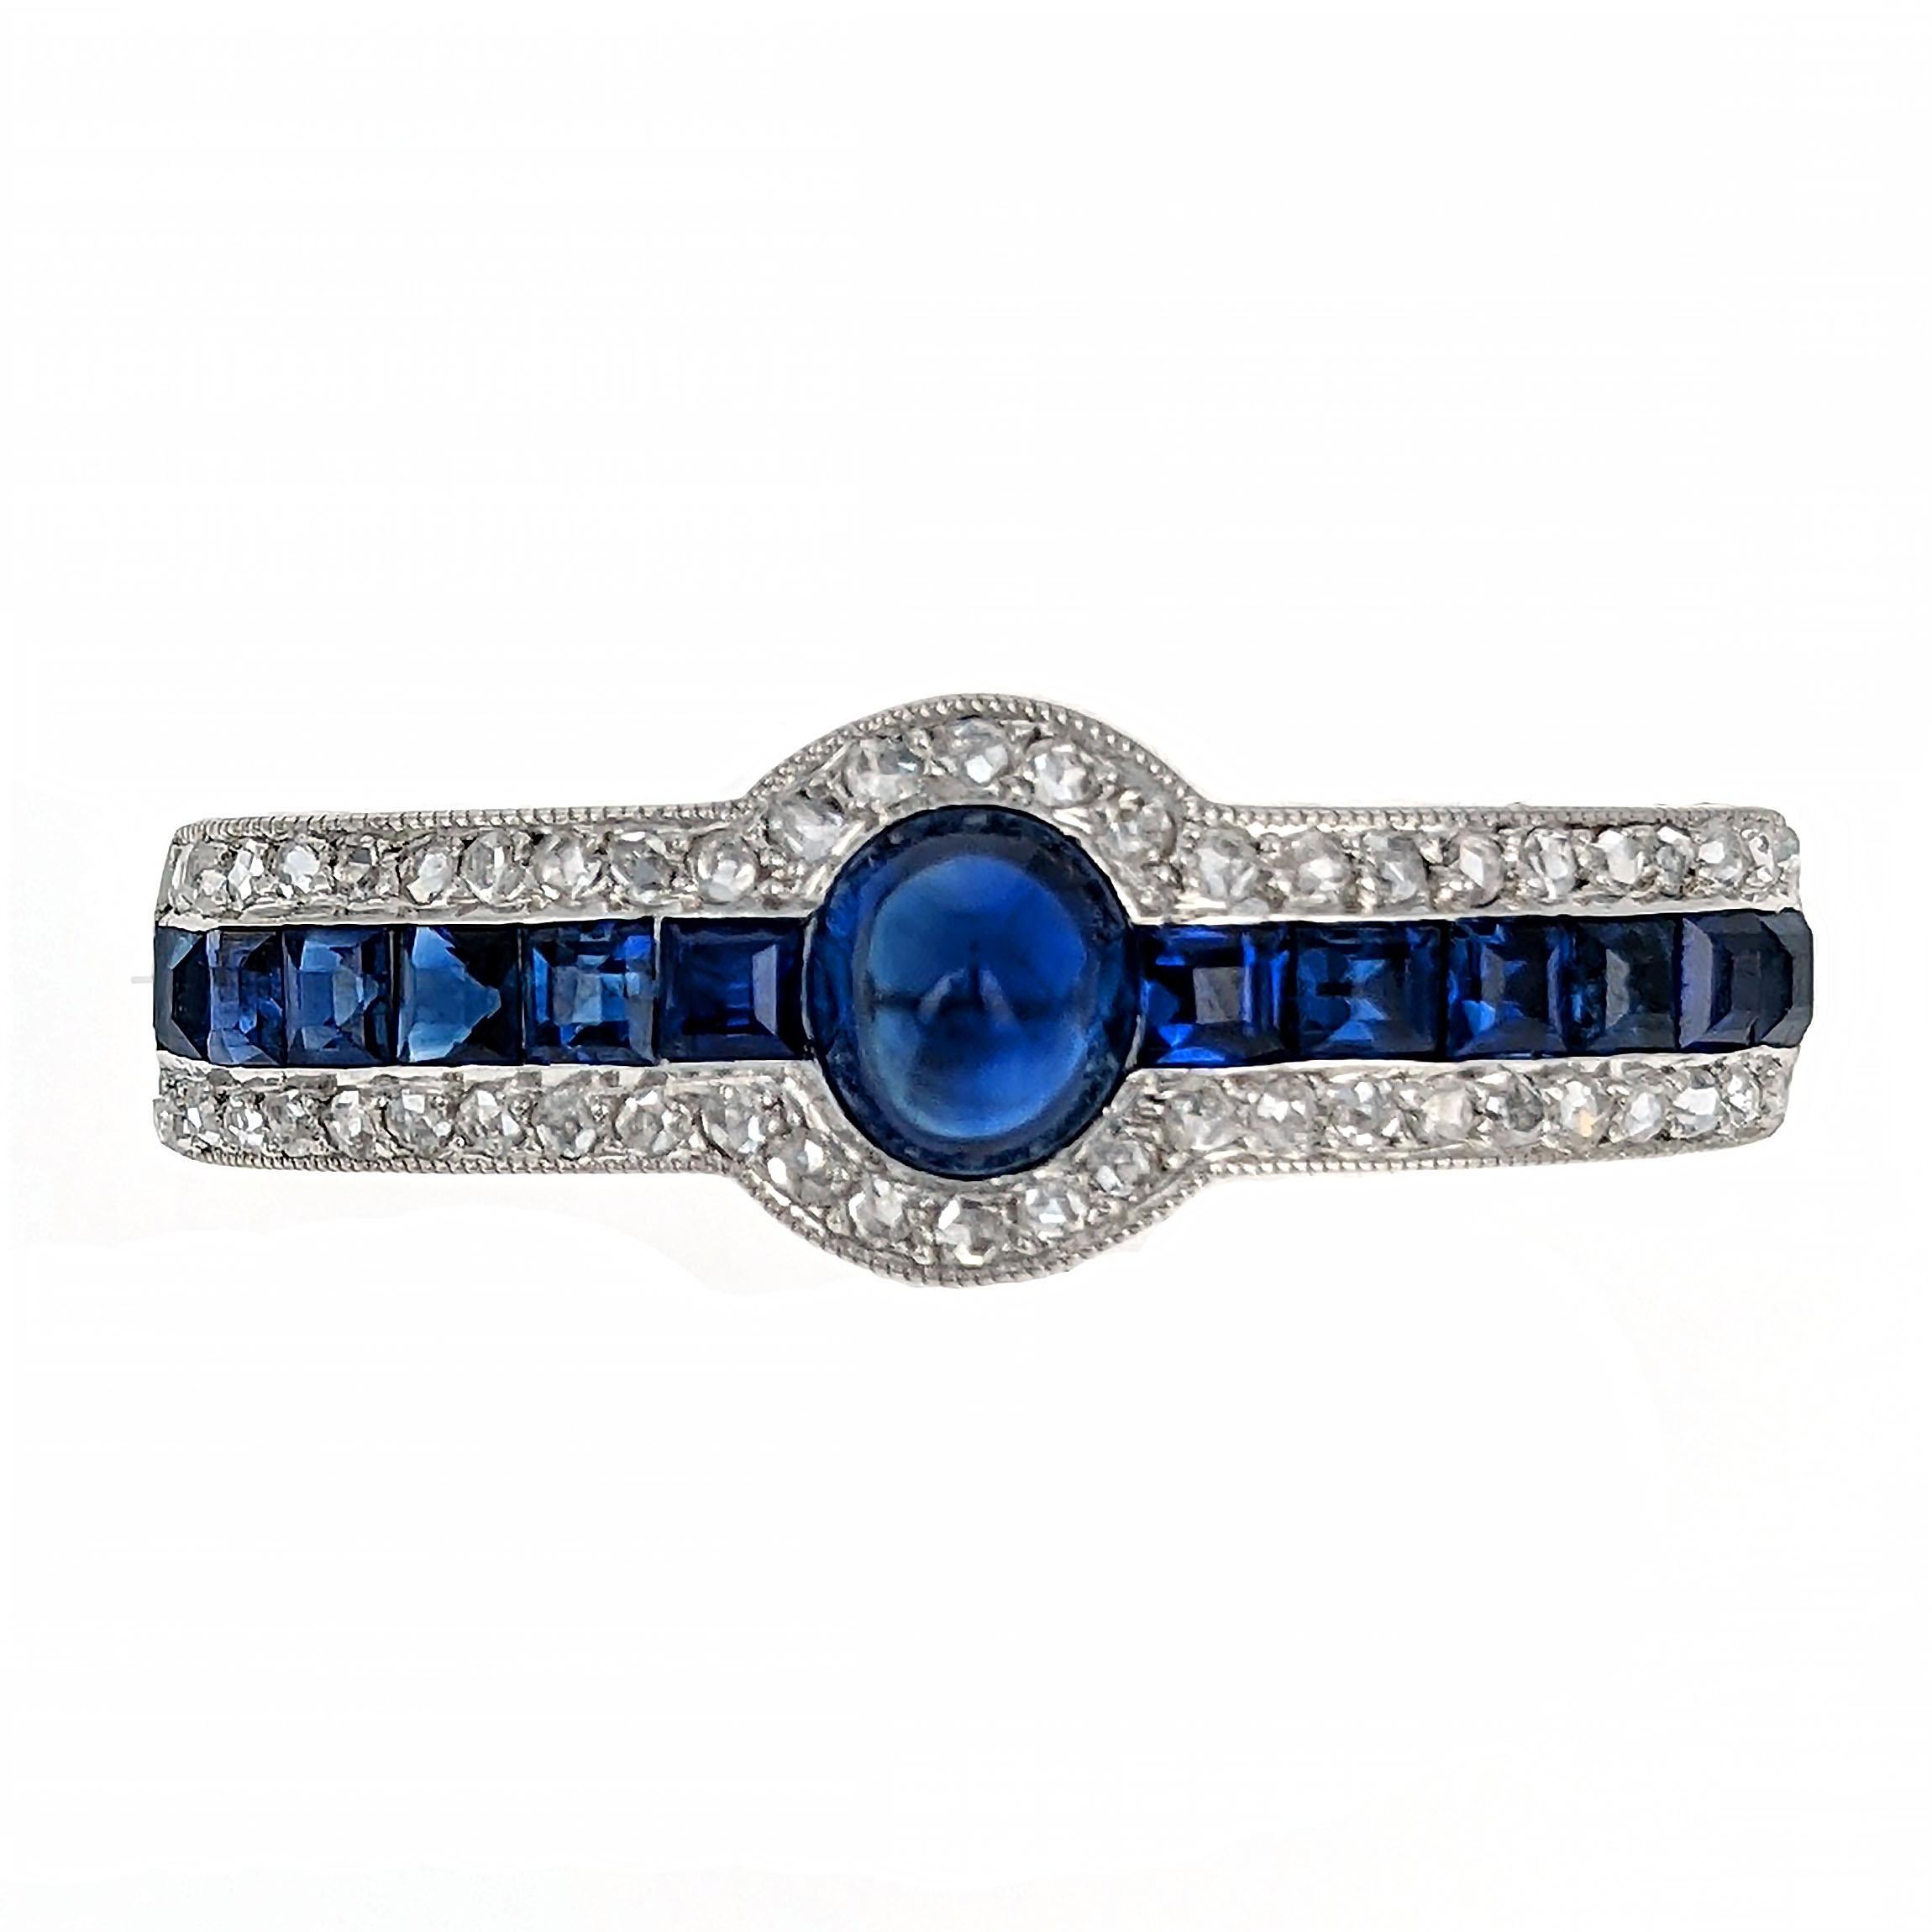 This stunning and elegant rounded brooch centers upon a row of calibré-cut sapphires flanking a single cabochon sapphire. It is edged with old rose-cut diamonds and mounted in millegrain set platinum. It is signed Cartier Paris with illegible serial